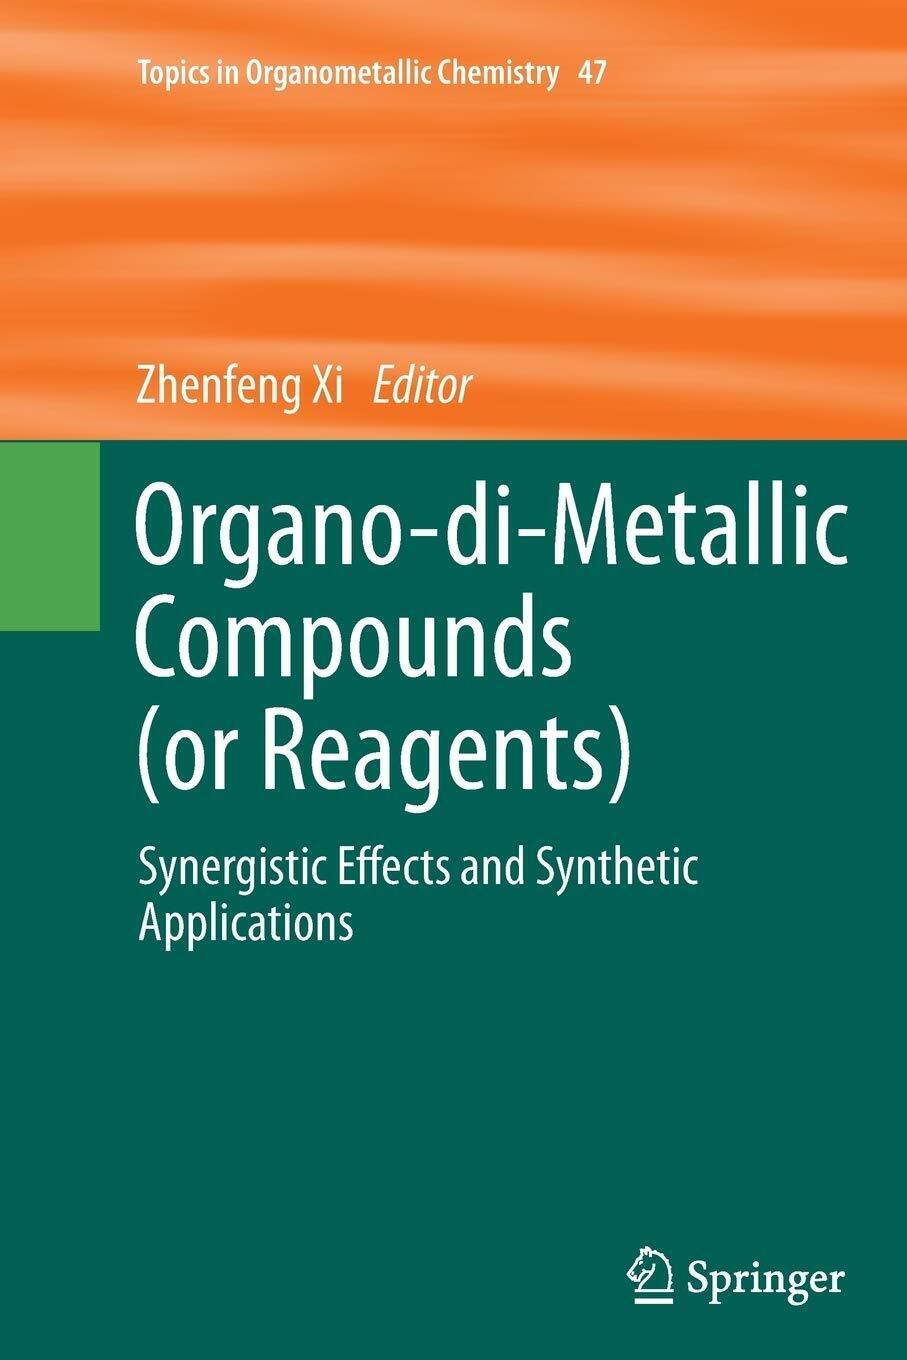 Organo-di-Metallic Compounds (or Reagents) - Zhenfeng Xi - Springer, 2016